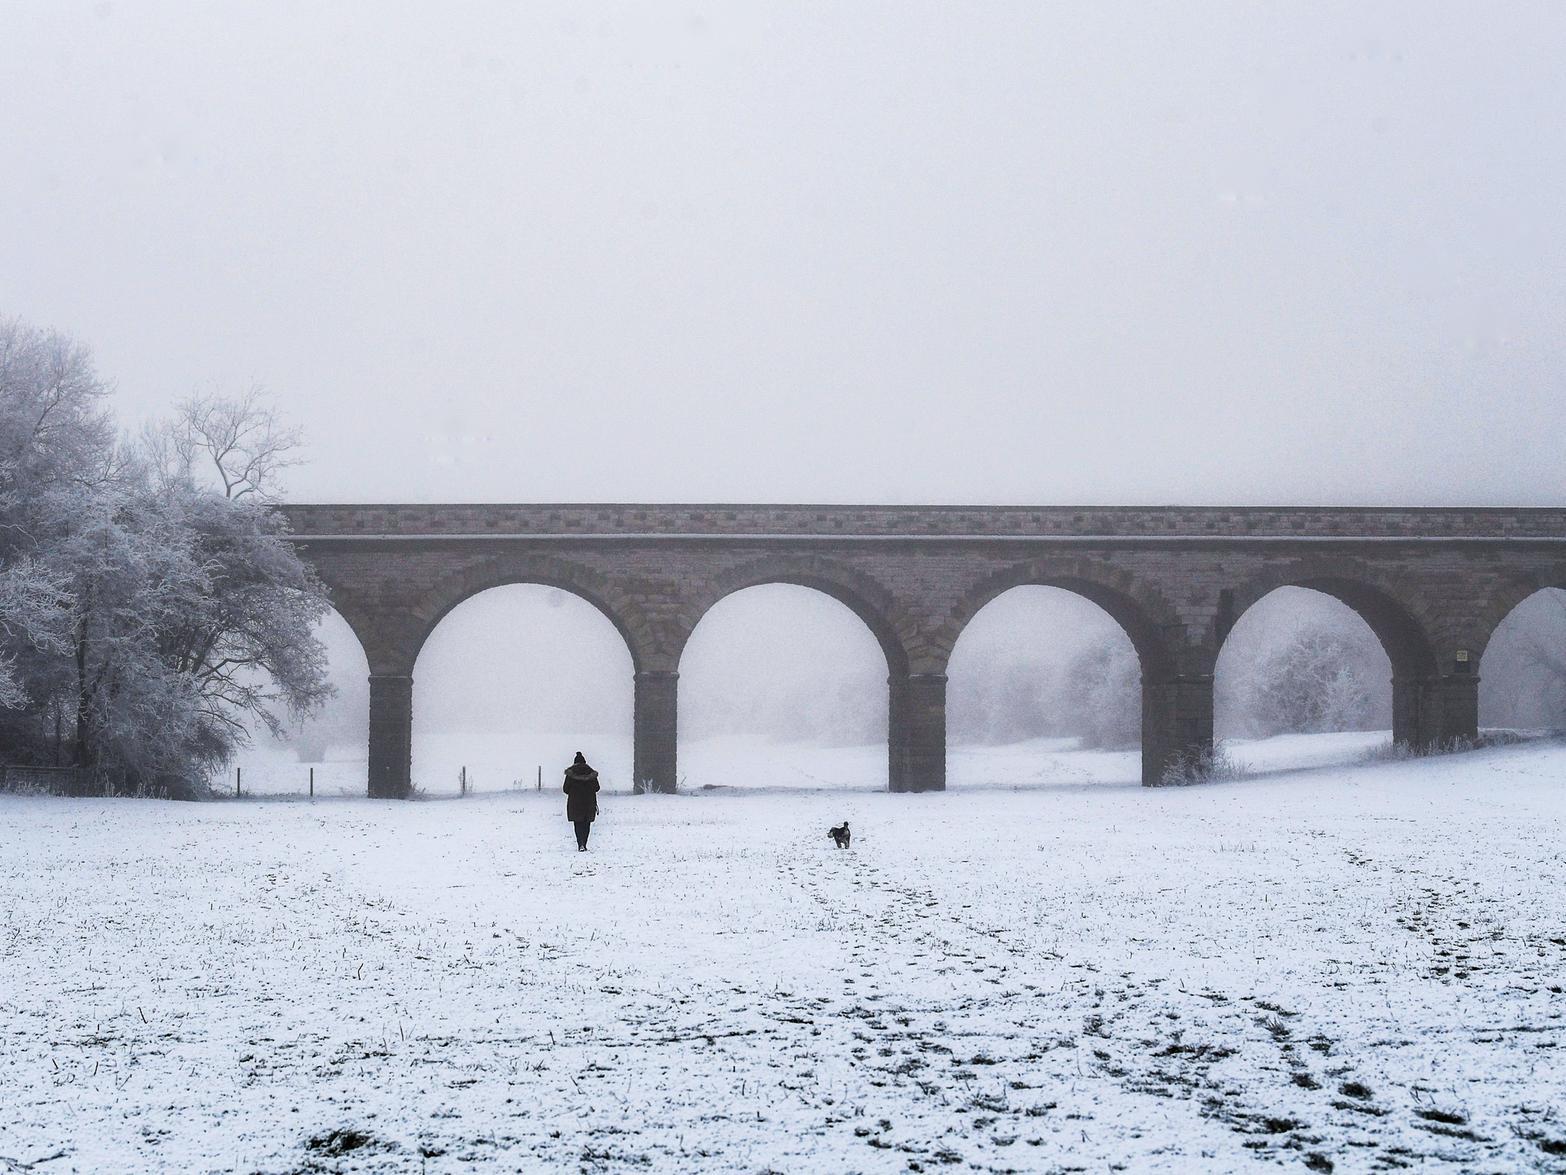 Hoar frost and a light covering of snow in January 2019 helps to show the splendour of Tadcaster viaduct which crosses the River Wharfe.